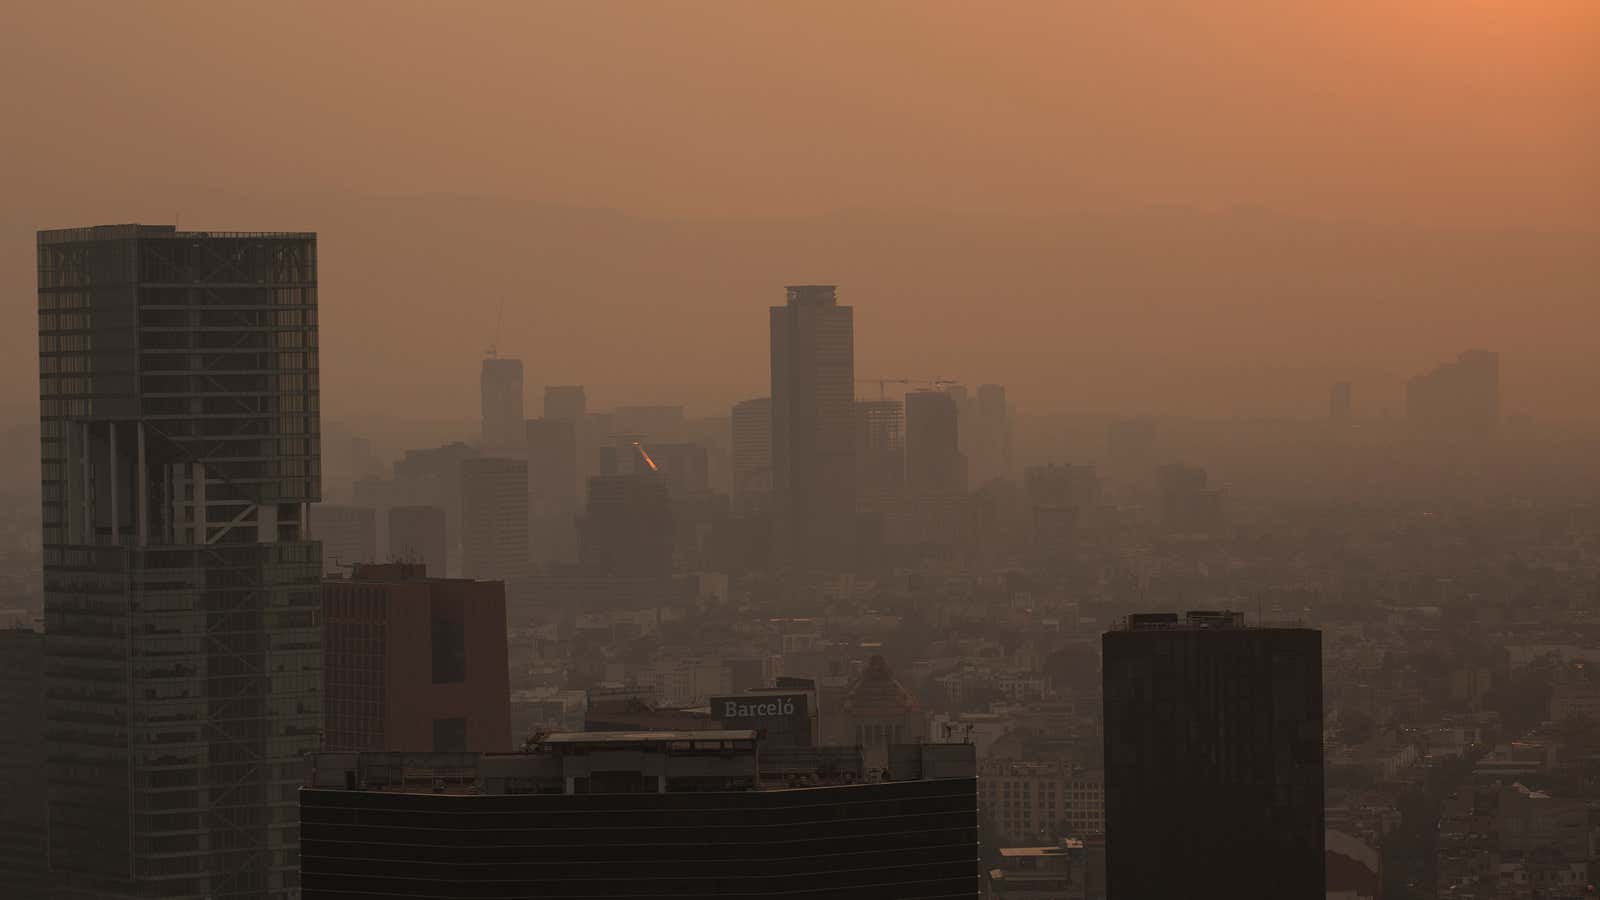 The sunset illuminates the haze as seen from the Latin American Tower on May 14.